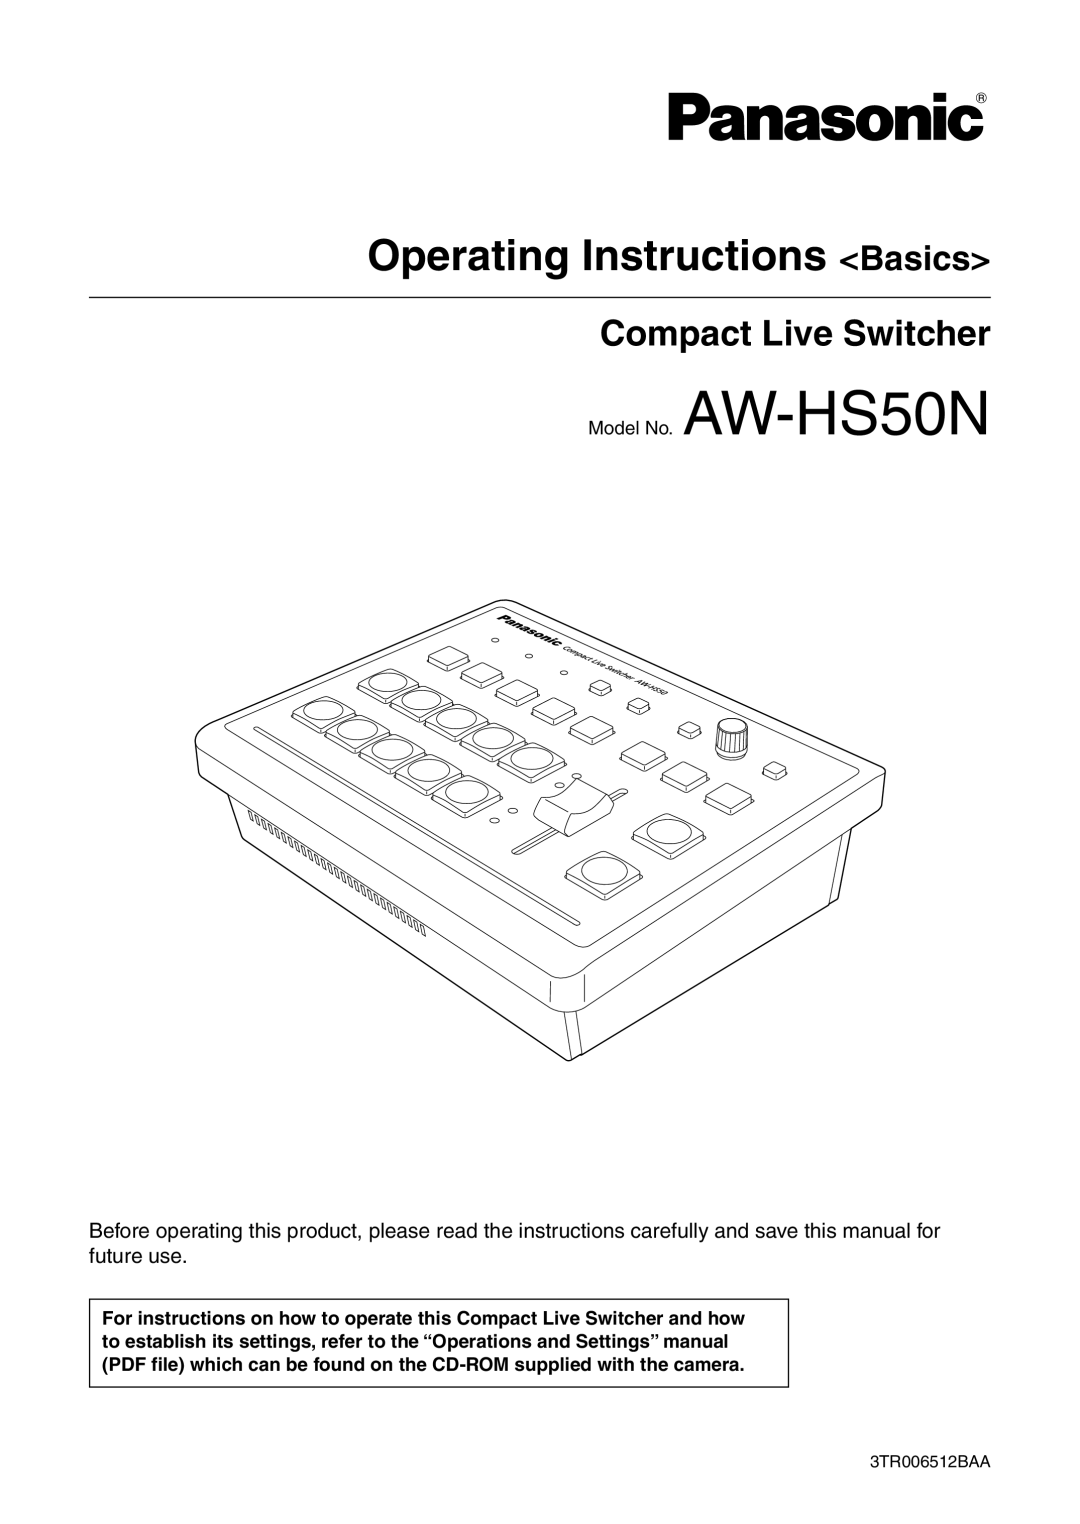 Panasonic AW-HS50N operating instructions Operating Instructions <Basics>, Compact Live Switcher 